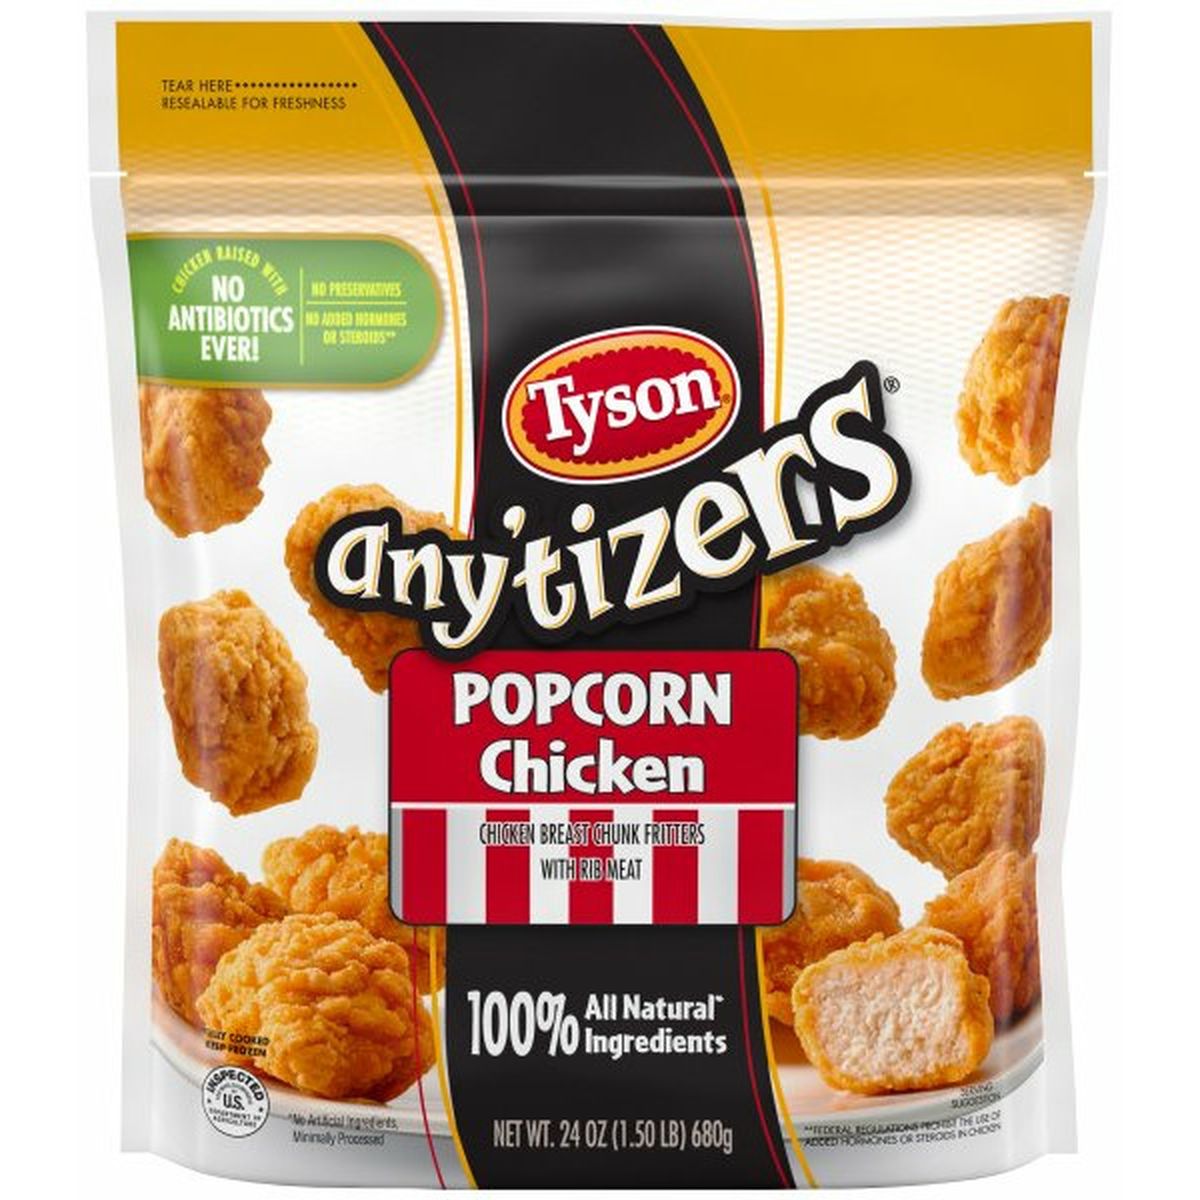 Calories in Tyson Any'tizers Tyson Any'tizers Popcorn Chicken